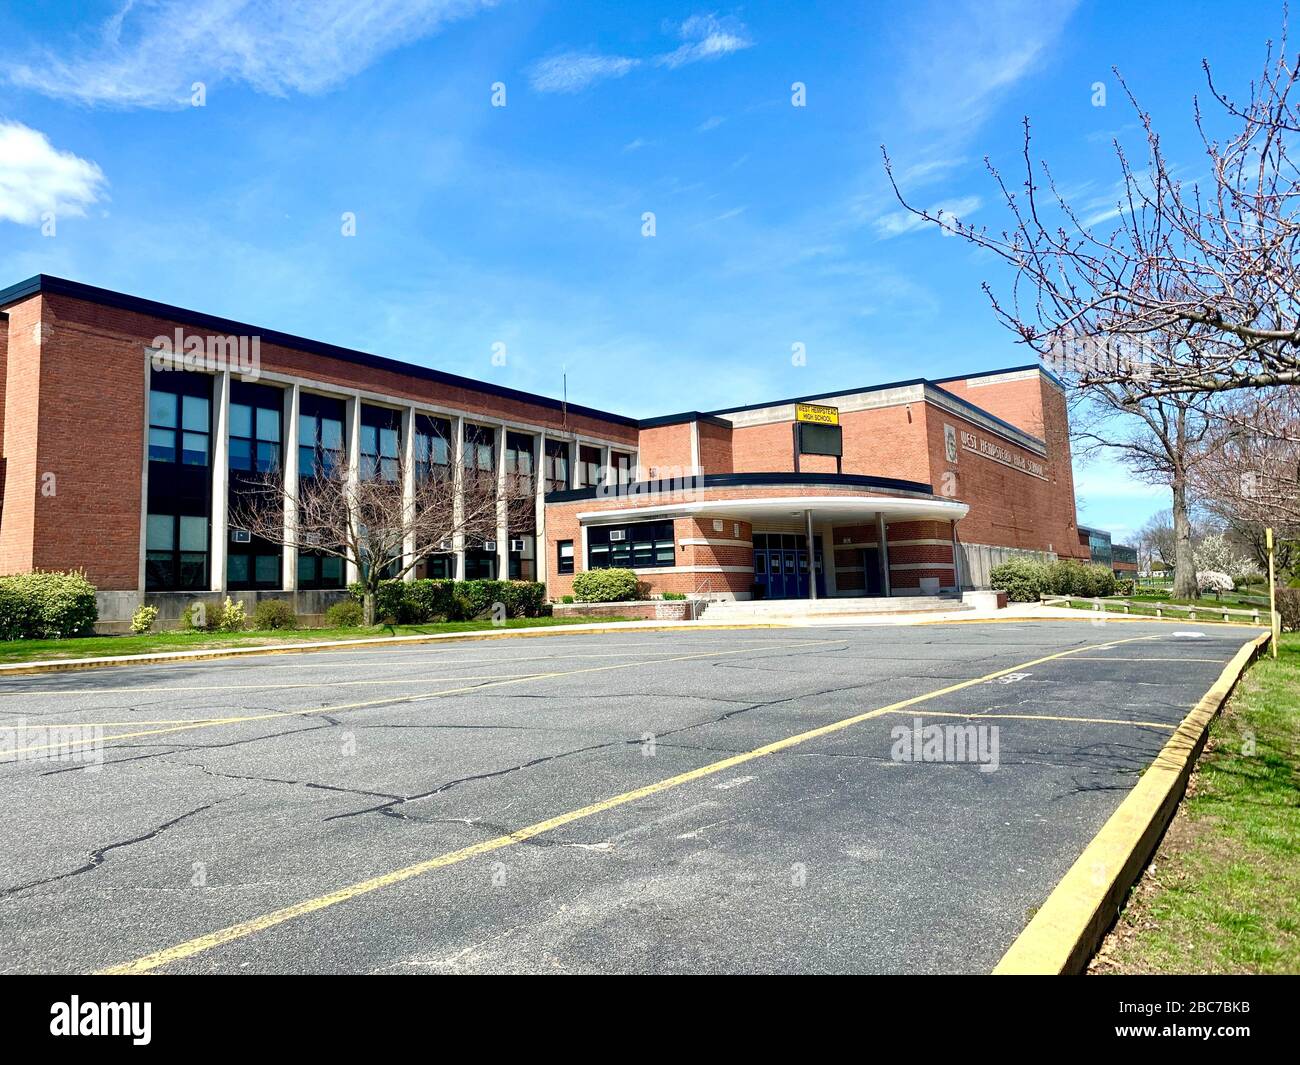 WEST HEMPSTEAD,  NEW YORK - APRIL 1, 2020:  West Hempstead High School in Nassau County New York stand empty due to mandatory closure amid Covid-19 Co Stock Photo